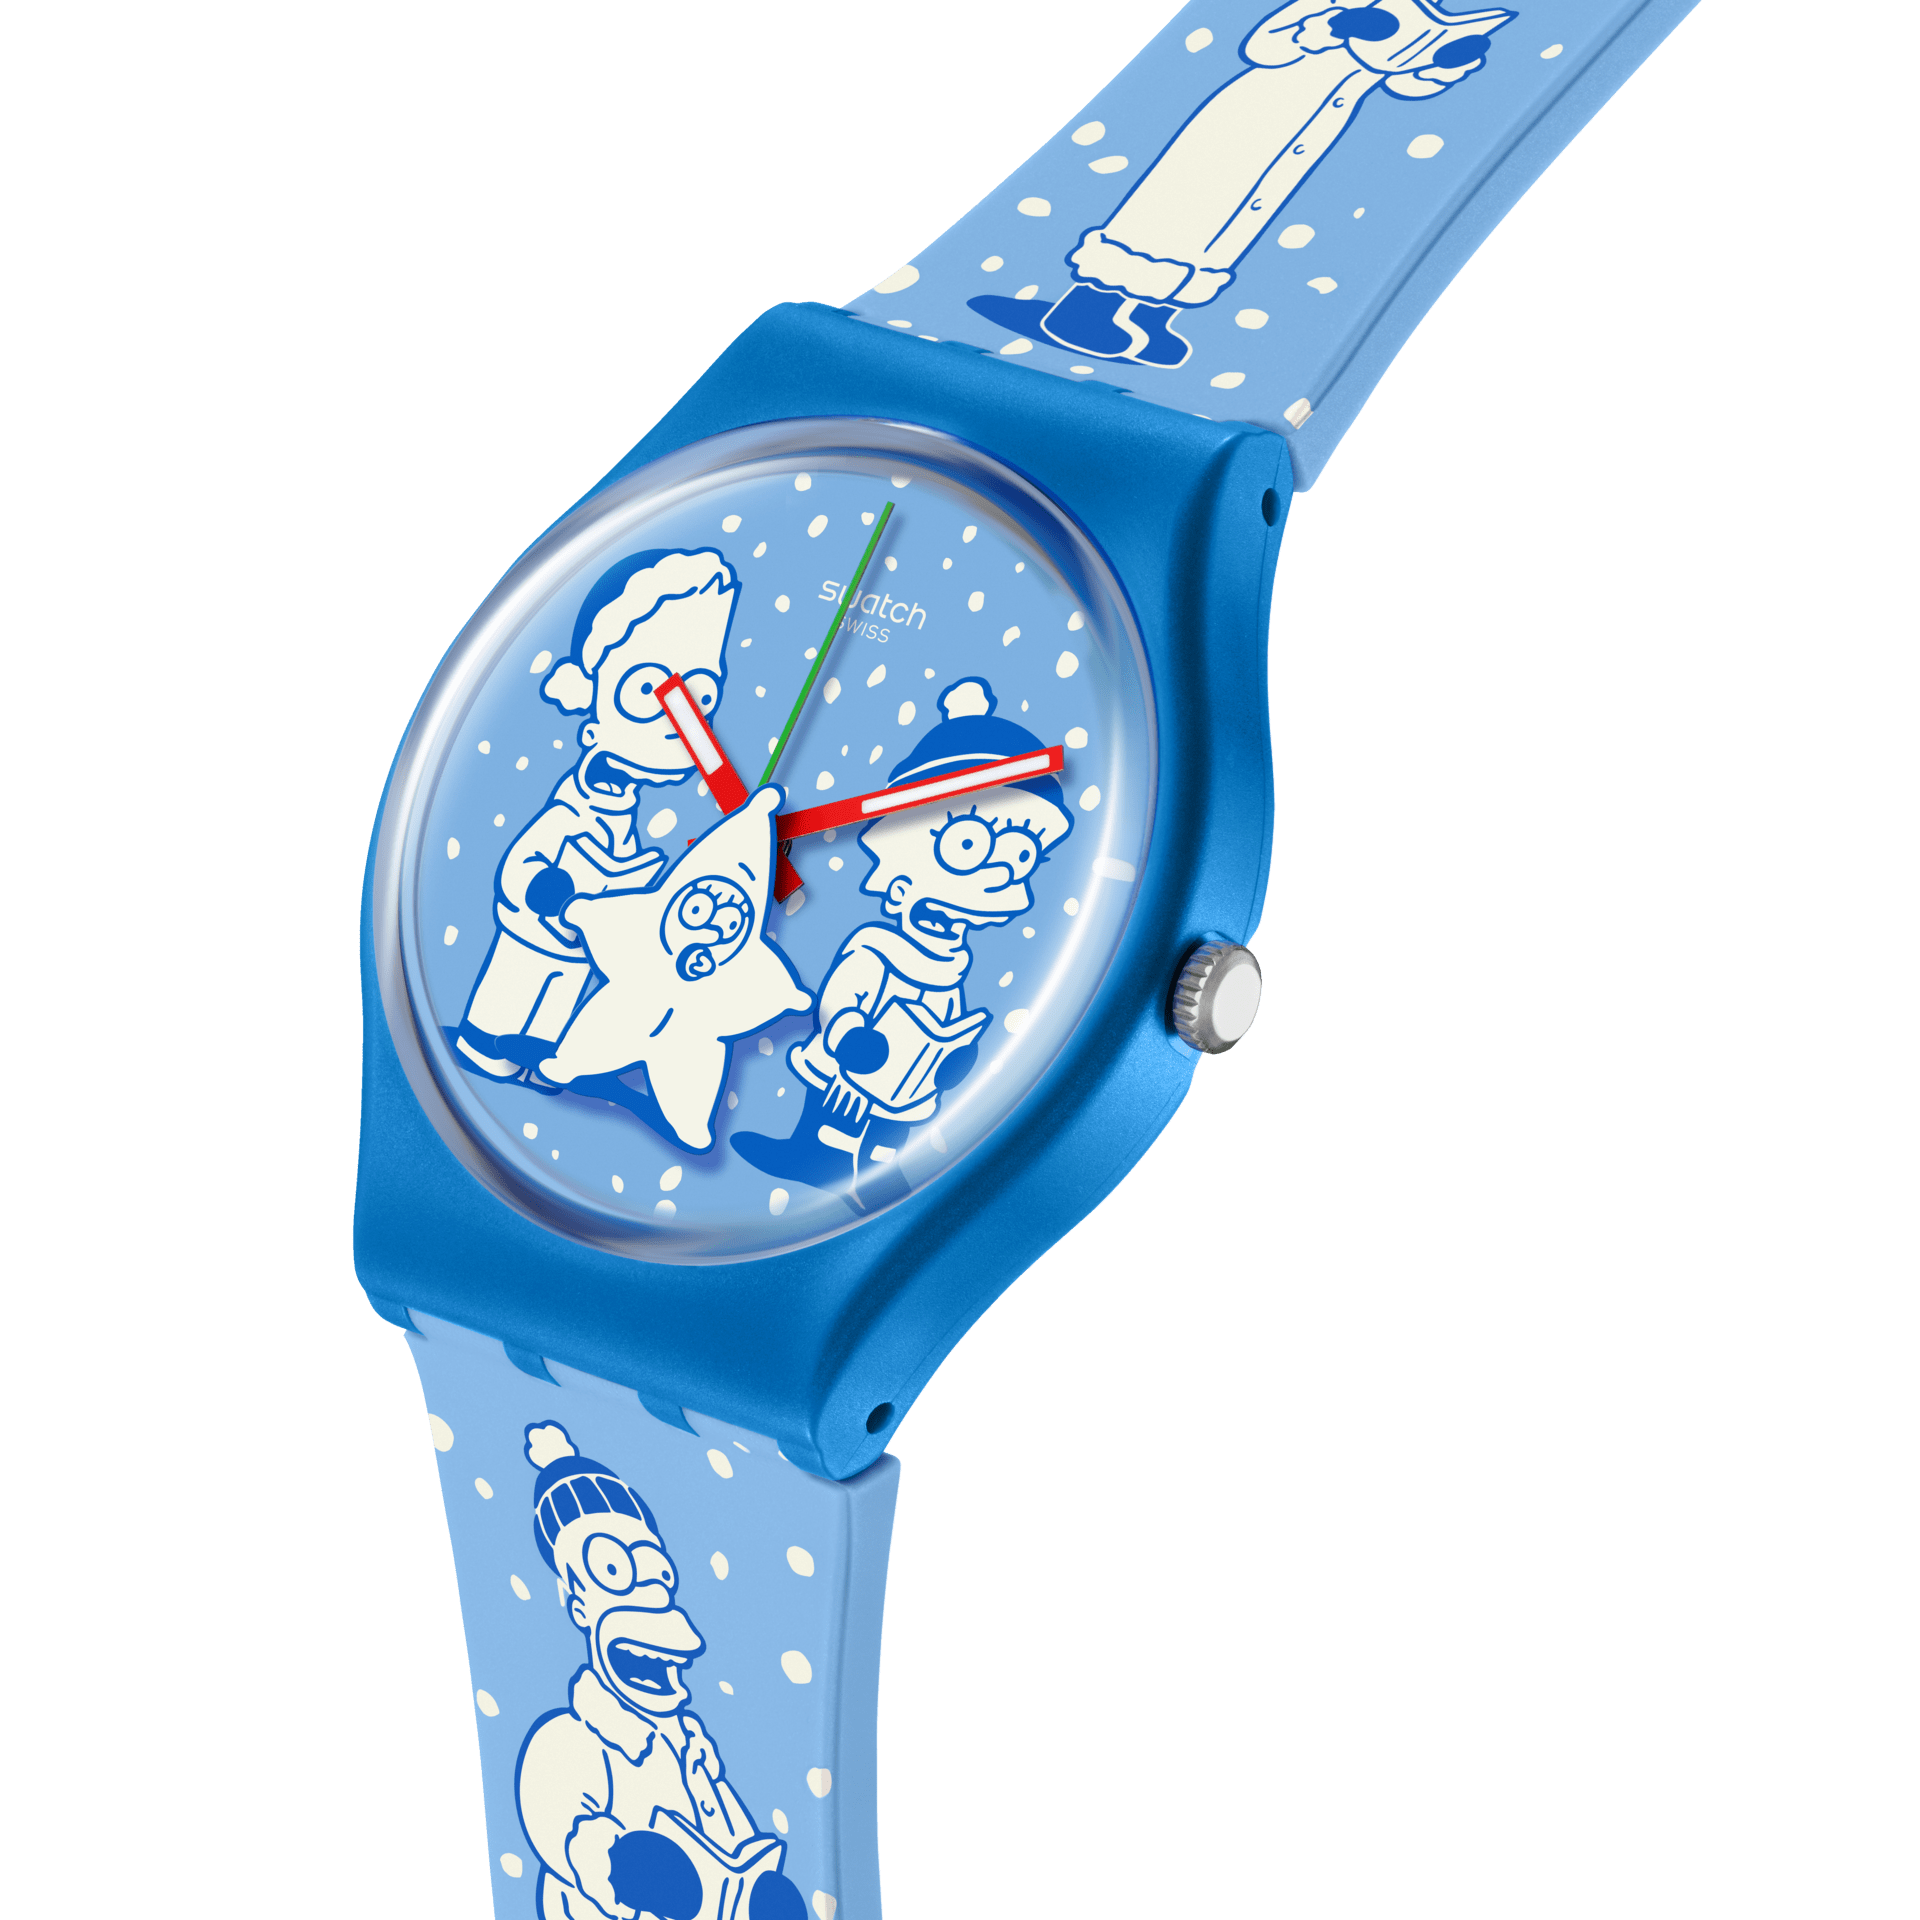 Swatch Watch Simpson's Two Tone Tidings 34mm